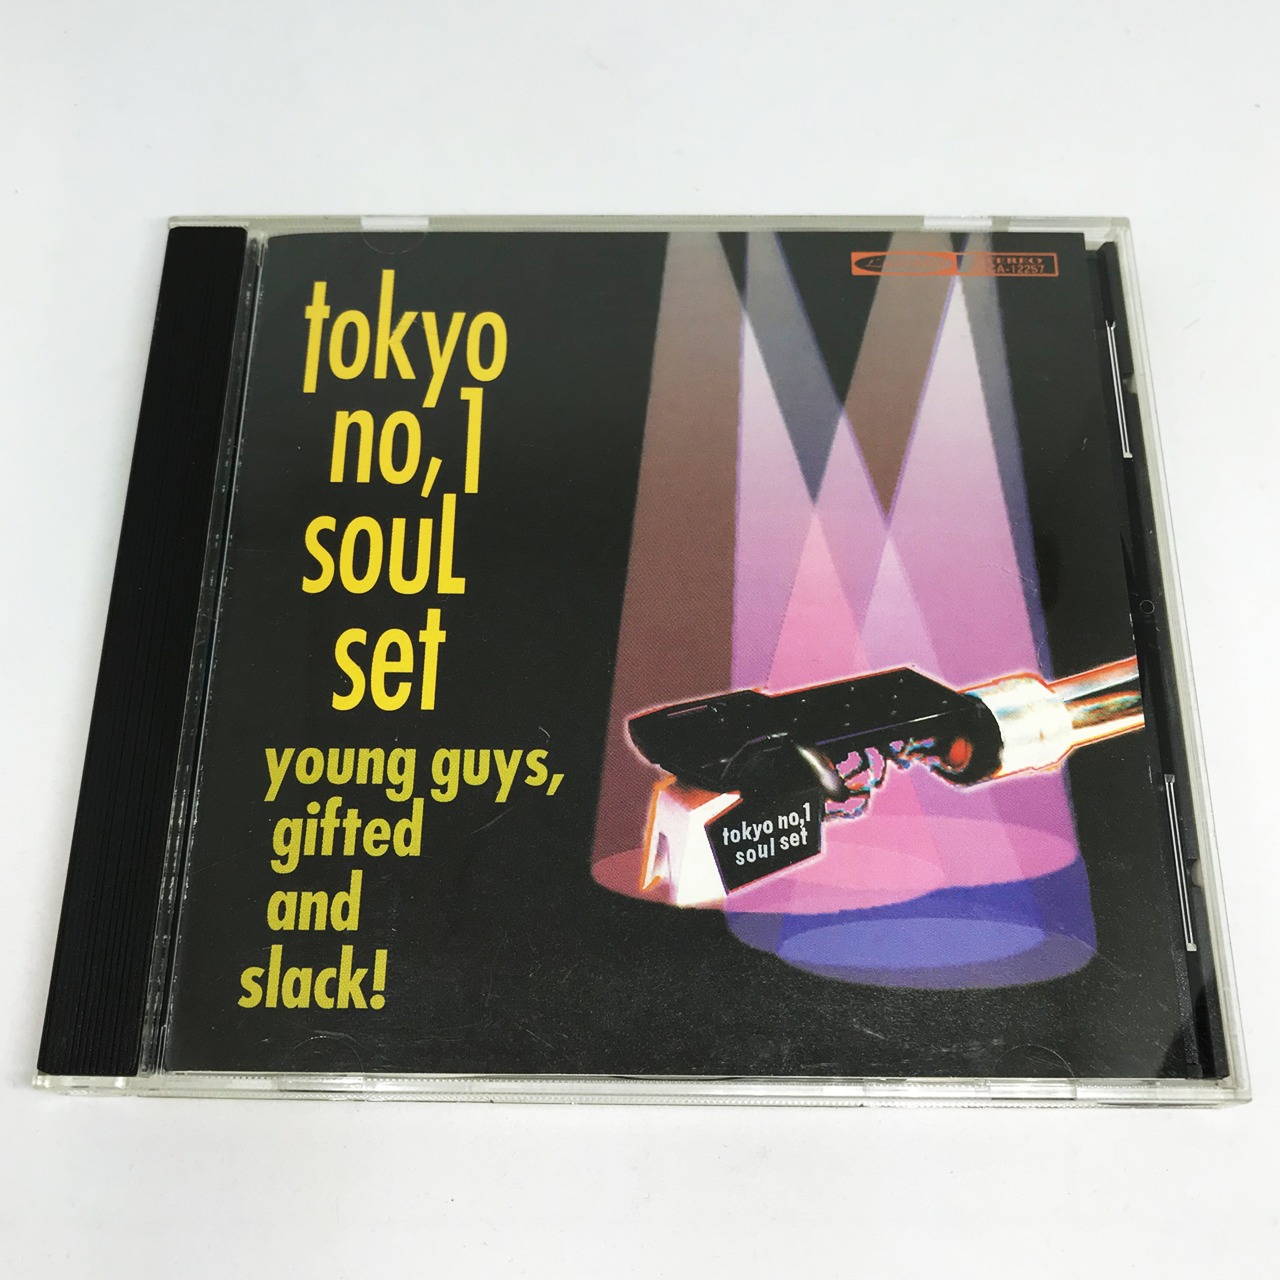 TOKYO No.1 SOUL SET / young guys, gifted and slack!